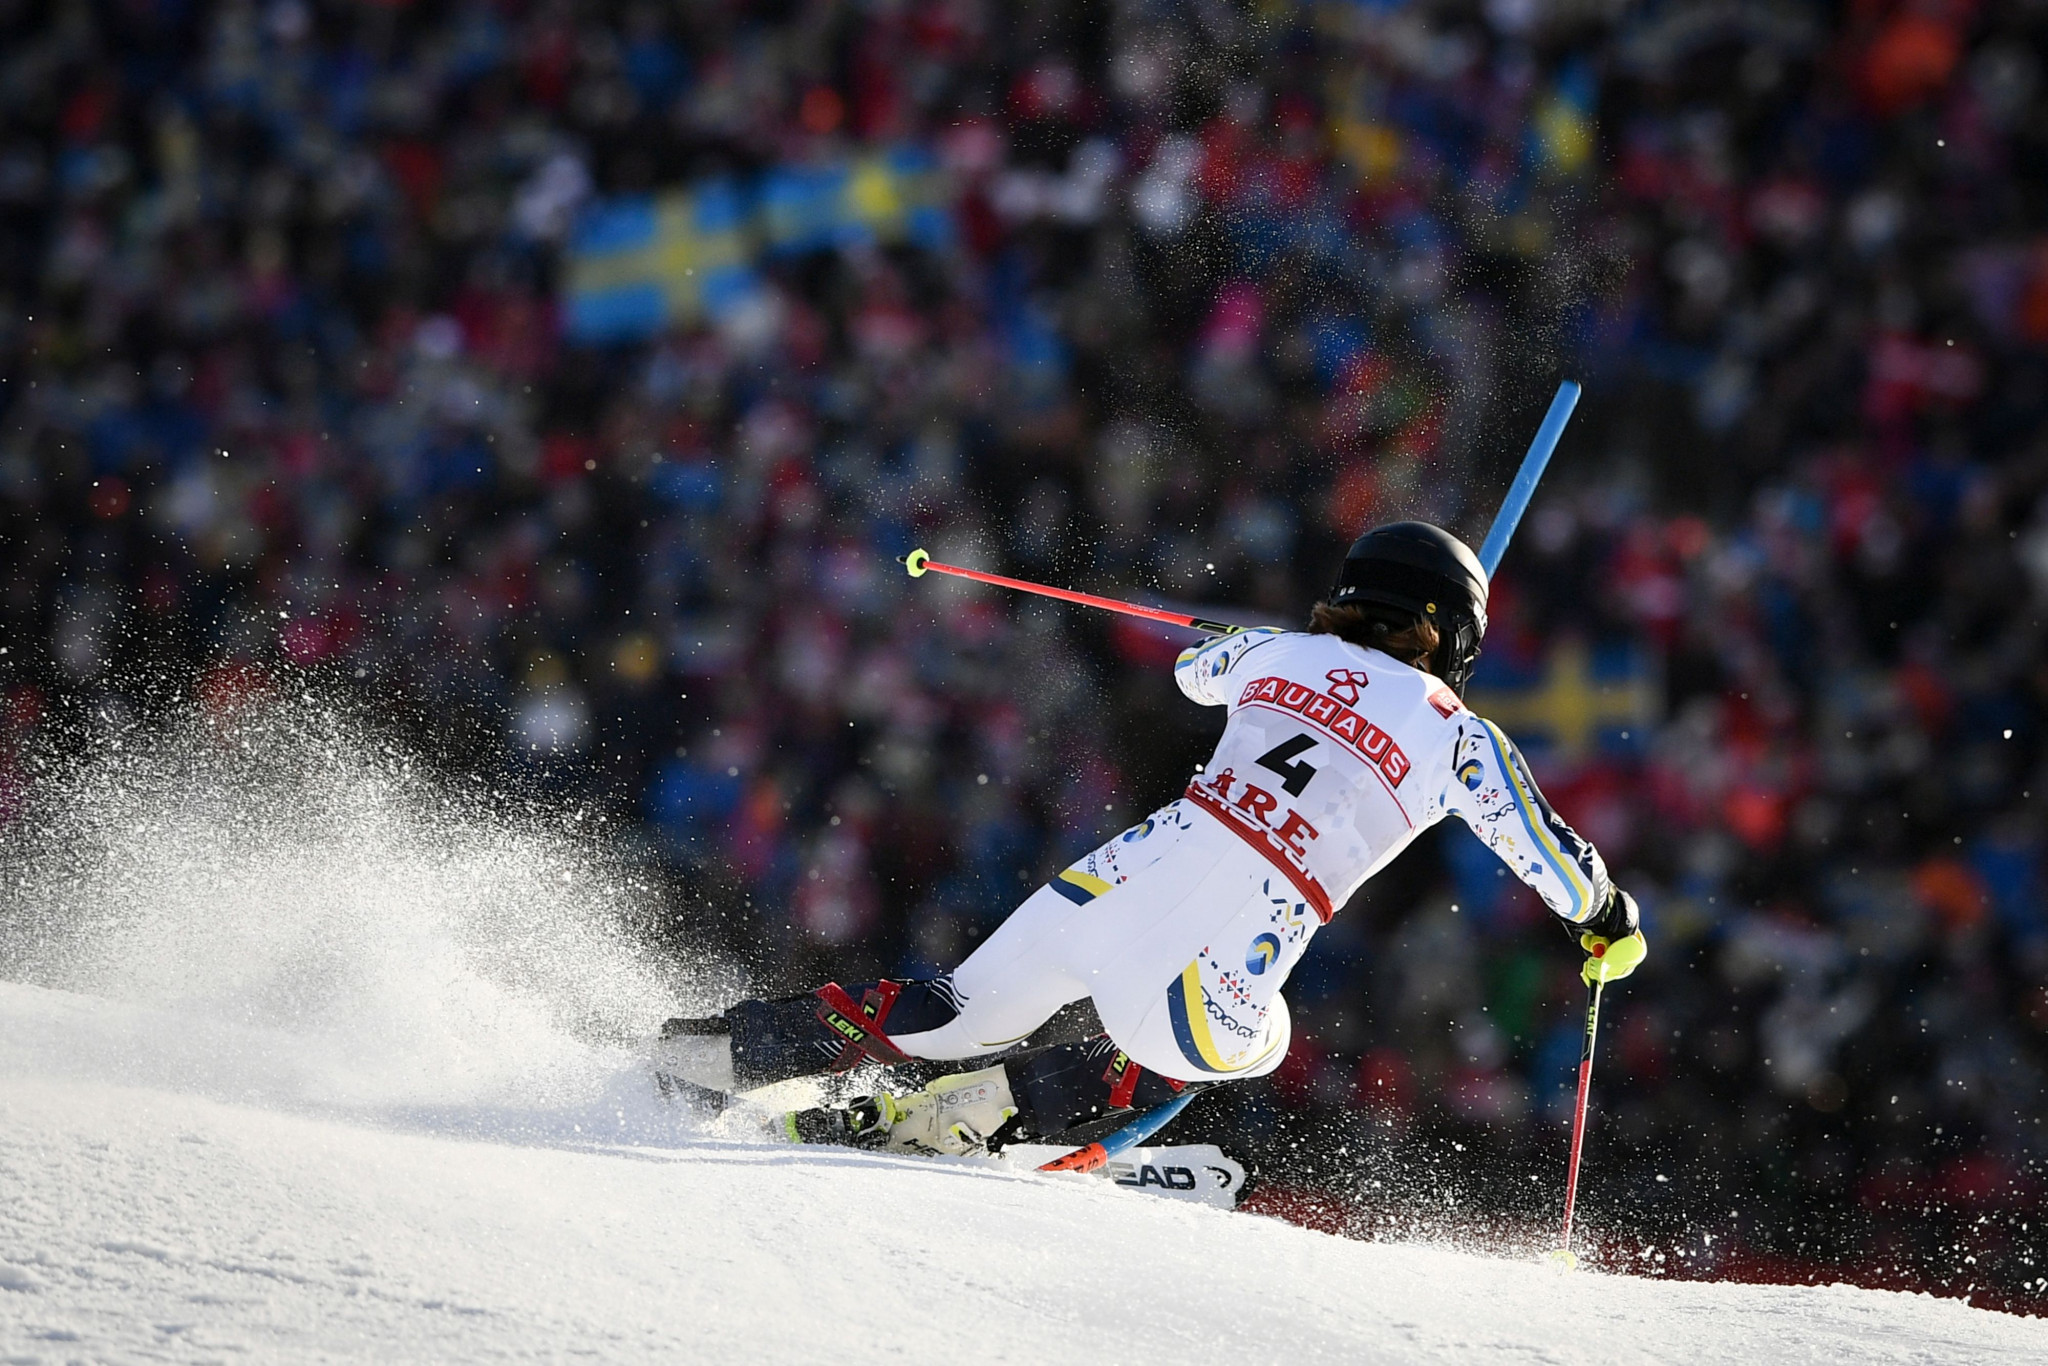 Sweden's Anna Swenn Larsson led the race at the halfway mark ©Getty Images